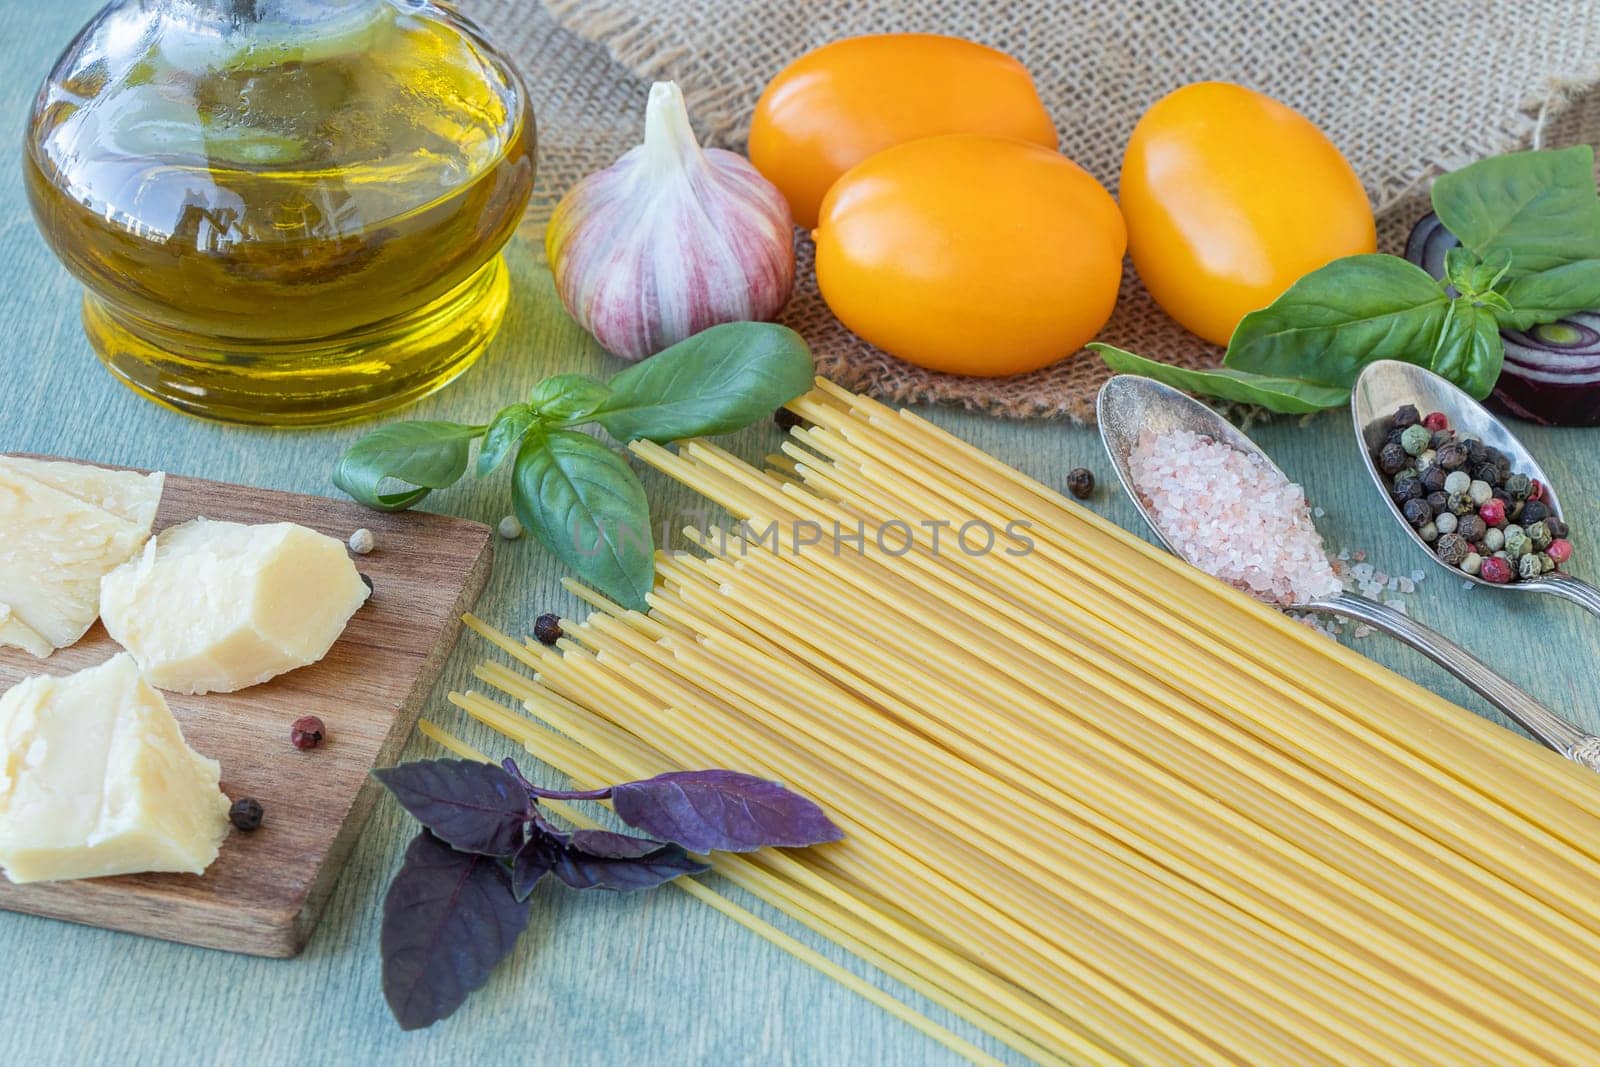 recipe for pasta with tomatoes or macaroni al pomodoro close-up of spaghetti, tomatoes, olive oil, basil, parmesan cheese, onion, garlic and spices. by Leoschka